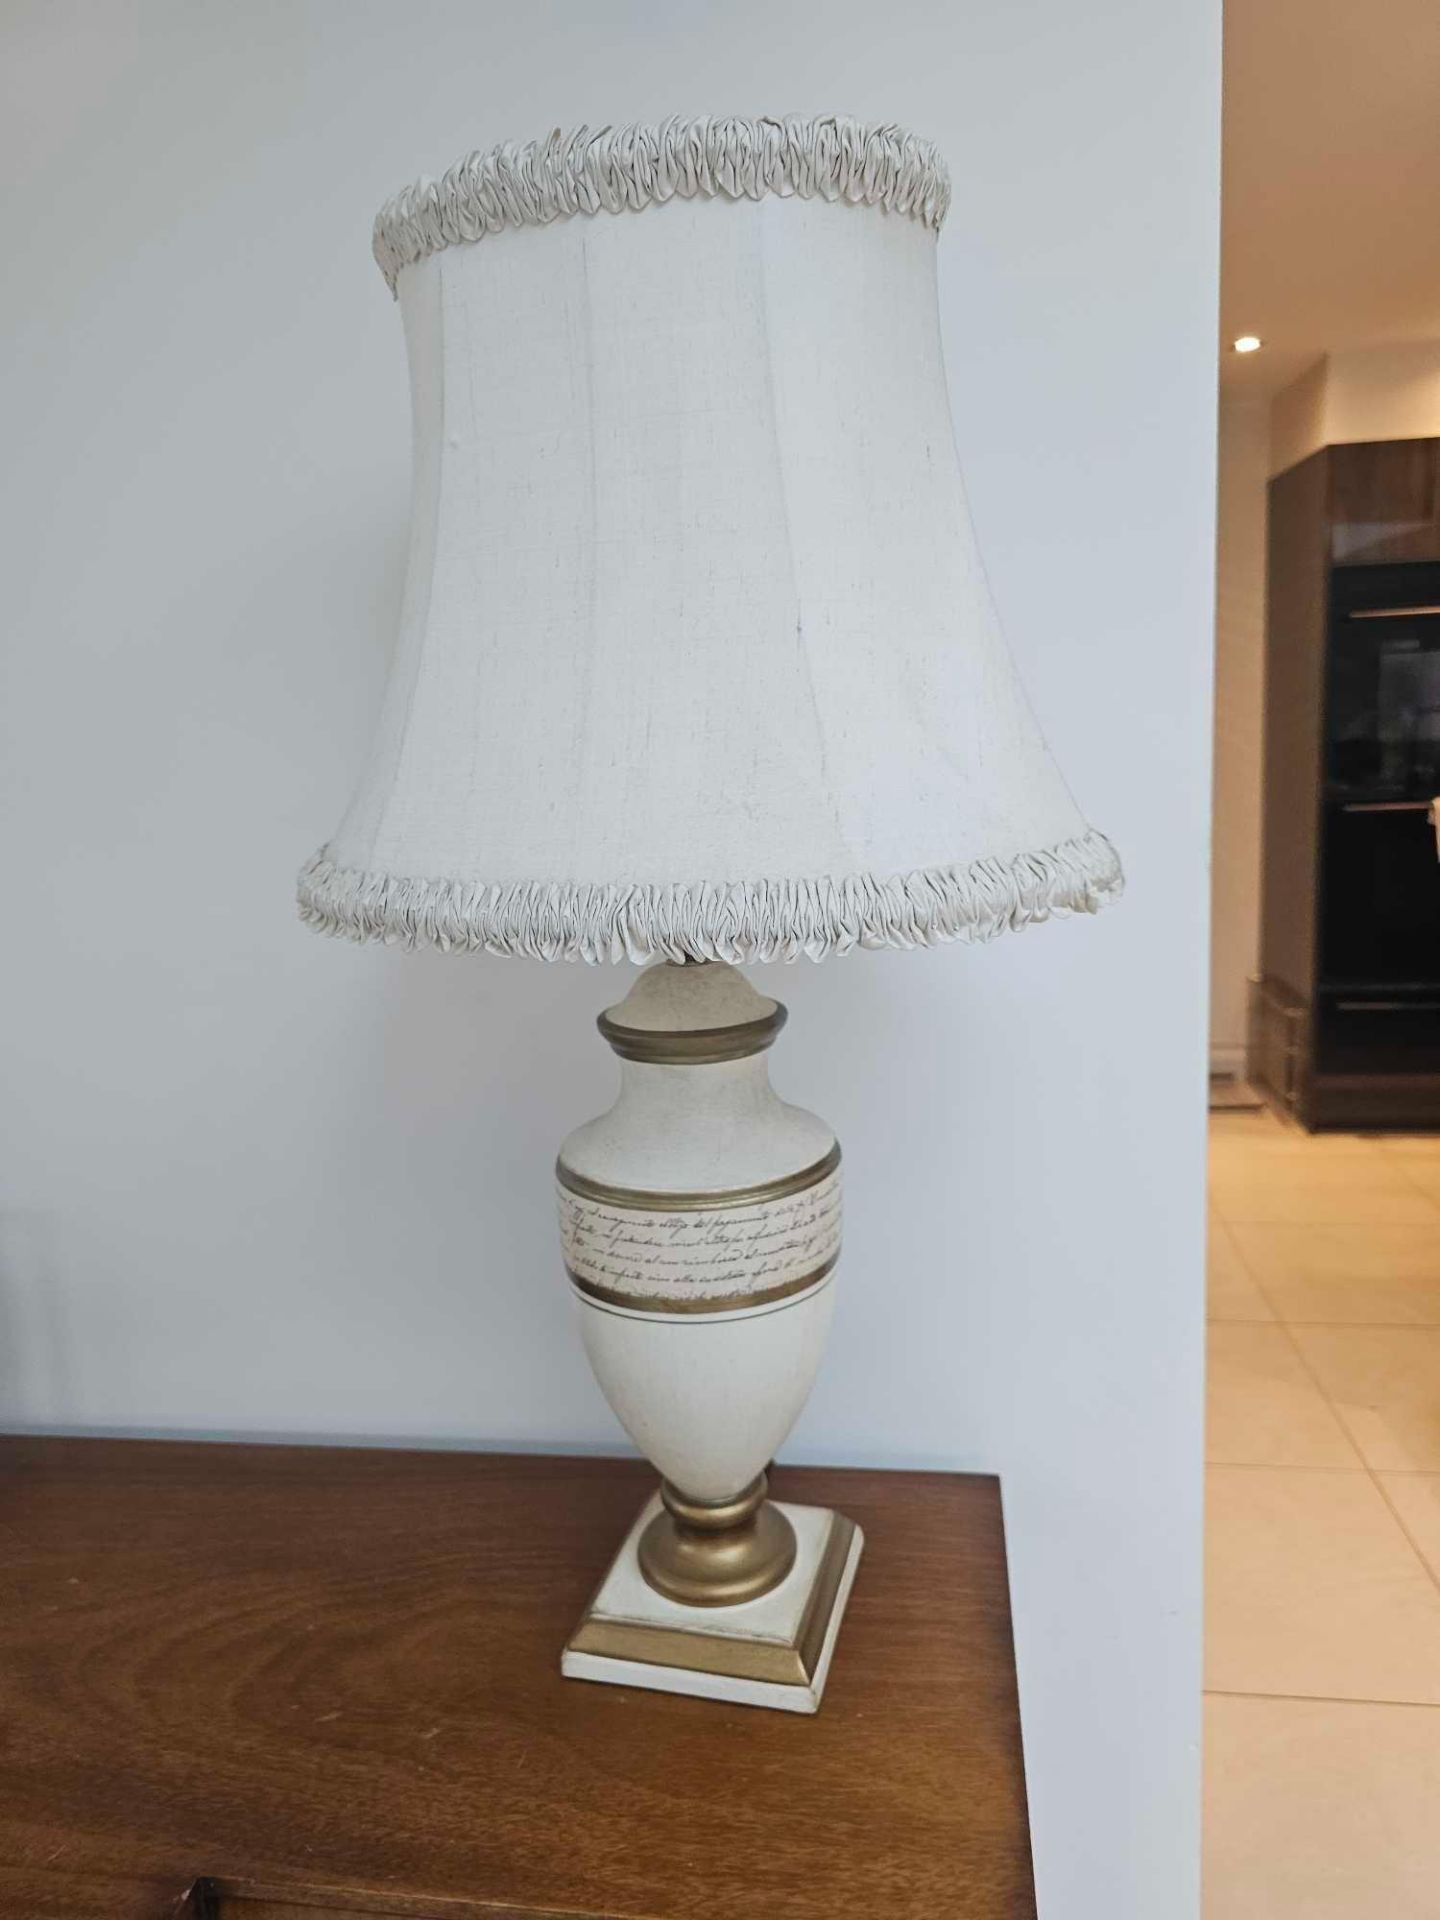 A Pair Of Ceramic Classic Urn Form Table Lamps Cream & Gold Pattern Square Base With Shades 76cm - Image 2 of 4